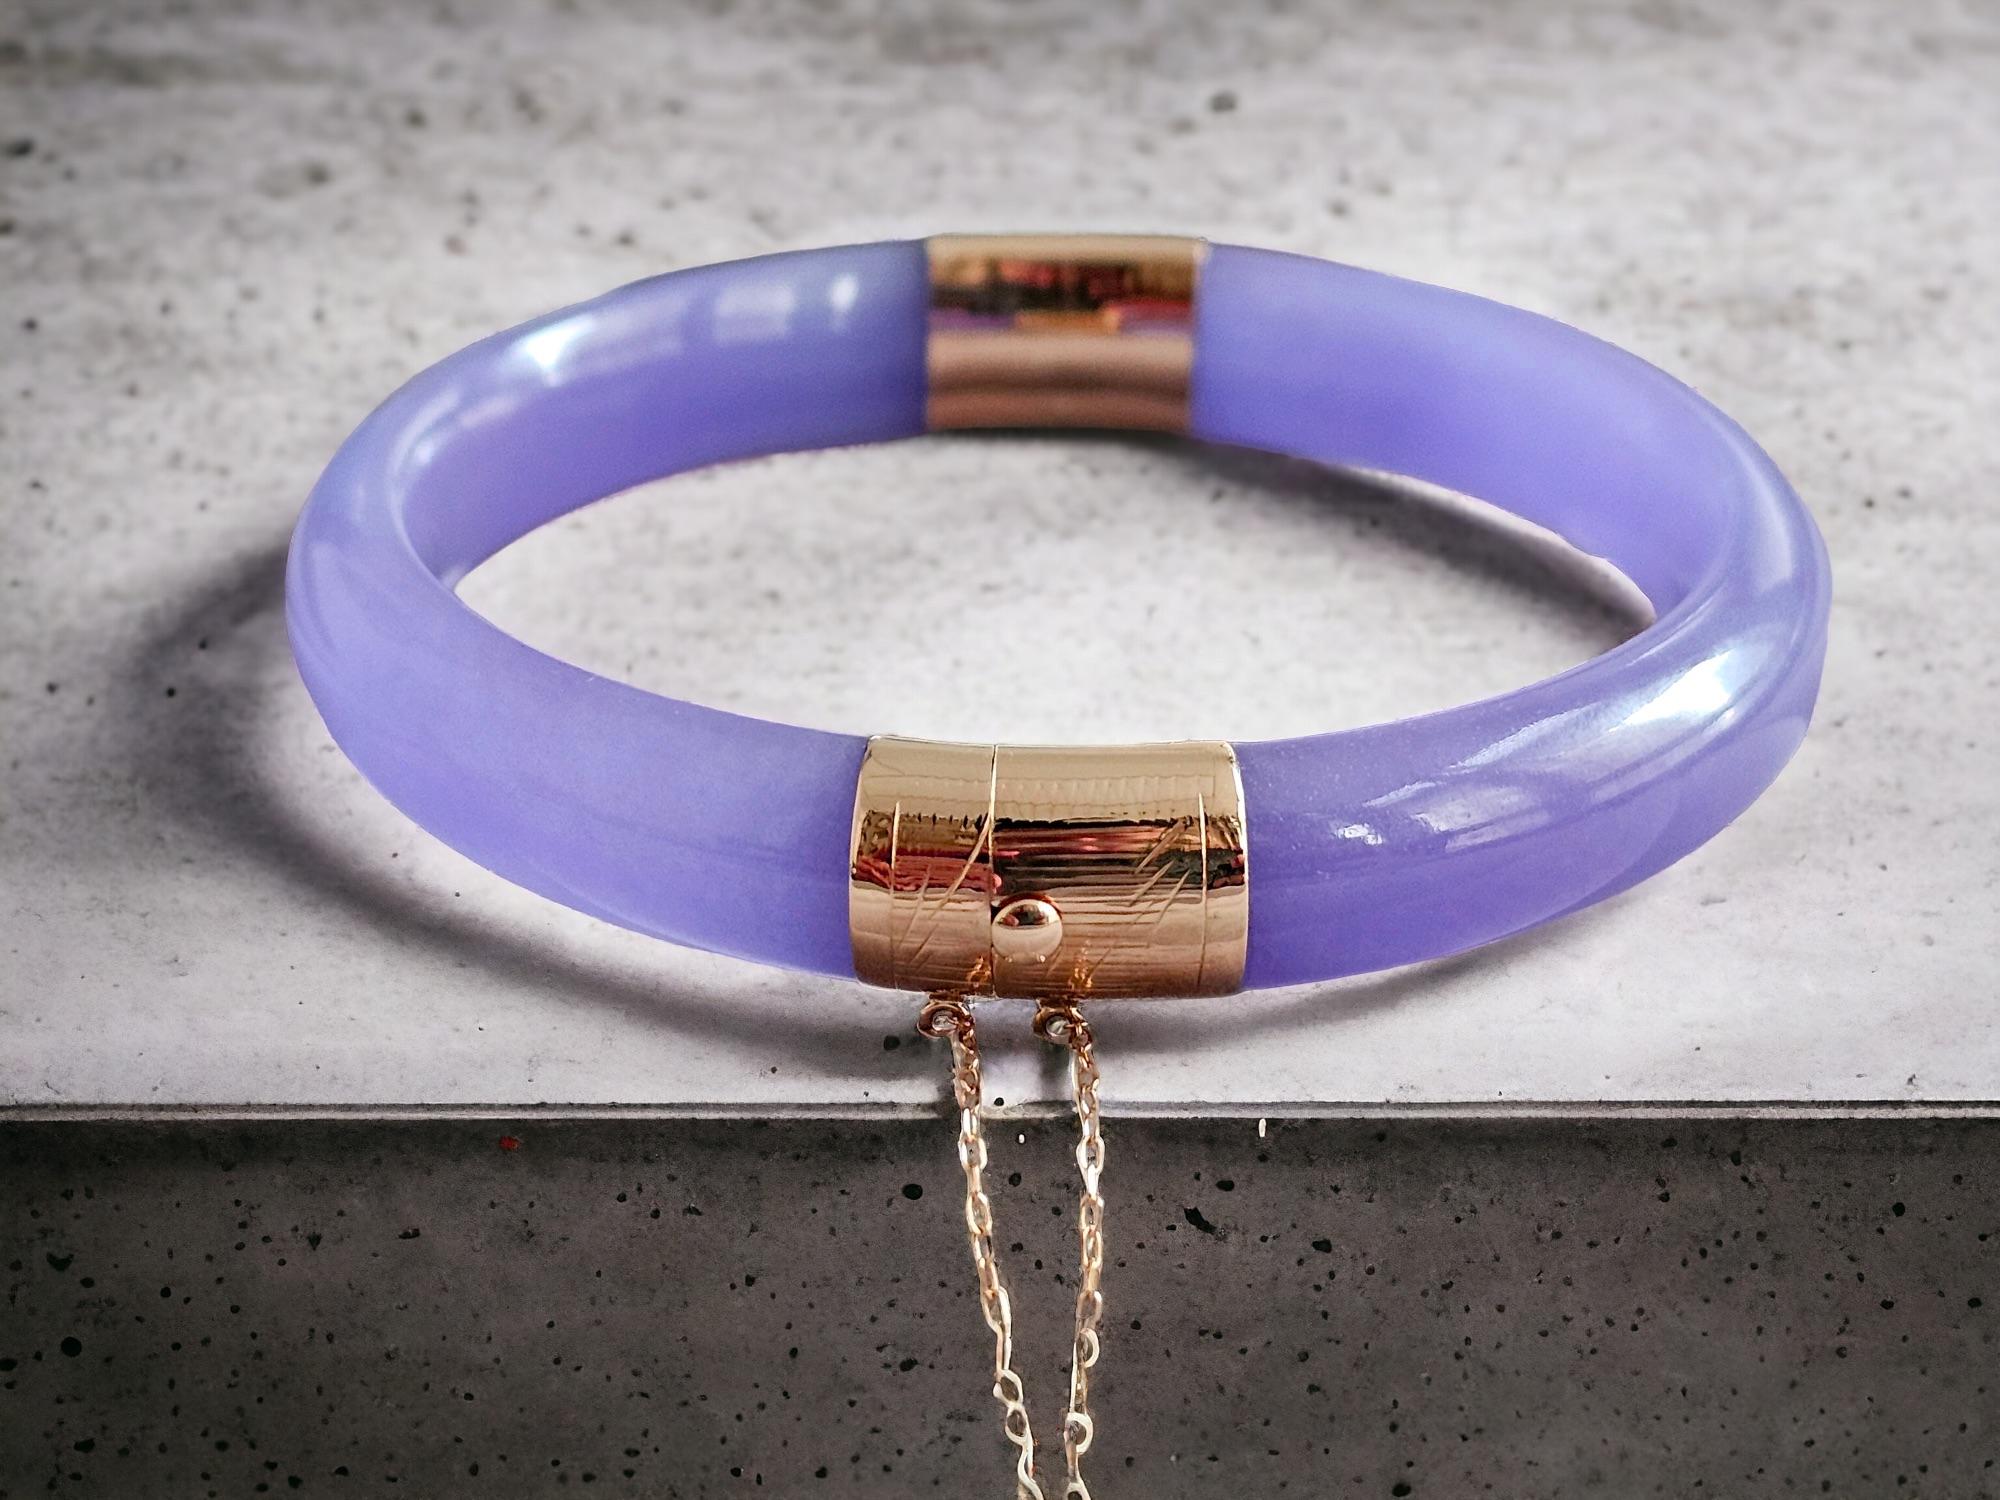 Viceroy's Circular Lavender Jade Bangle Bracelet (with 14K Yellow Gold) In New Condition For Sale In Kowloon, HK